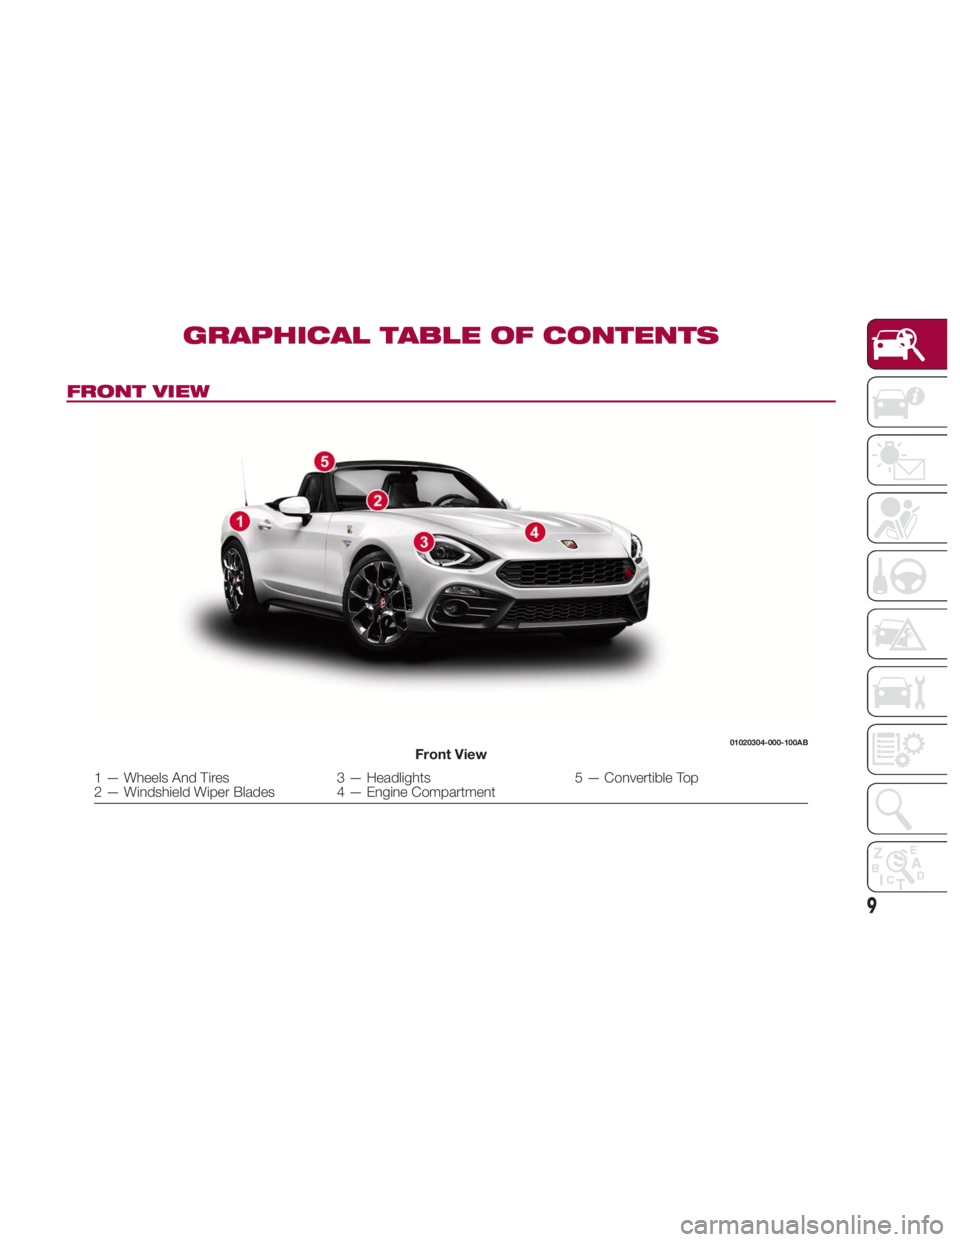 FIAT SPIDER ABARTH 2017  Owners Manual GRAPHICAL TABLE OF CONTENTSFRONT VIEW 01020304-000-100AB
Front View
1 — Wheels And Tires 3 — Headlights 5 — Convertible Top
2 — Windshield Wiper Blades 4 — Engine Compartment
9 